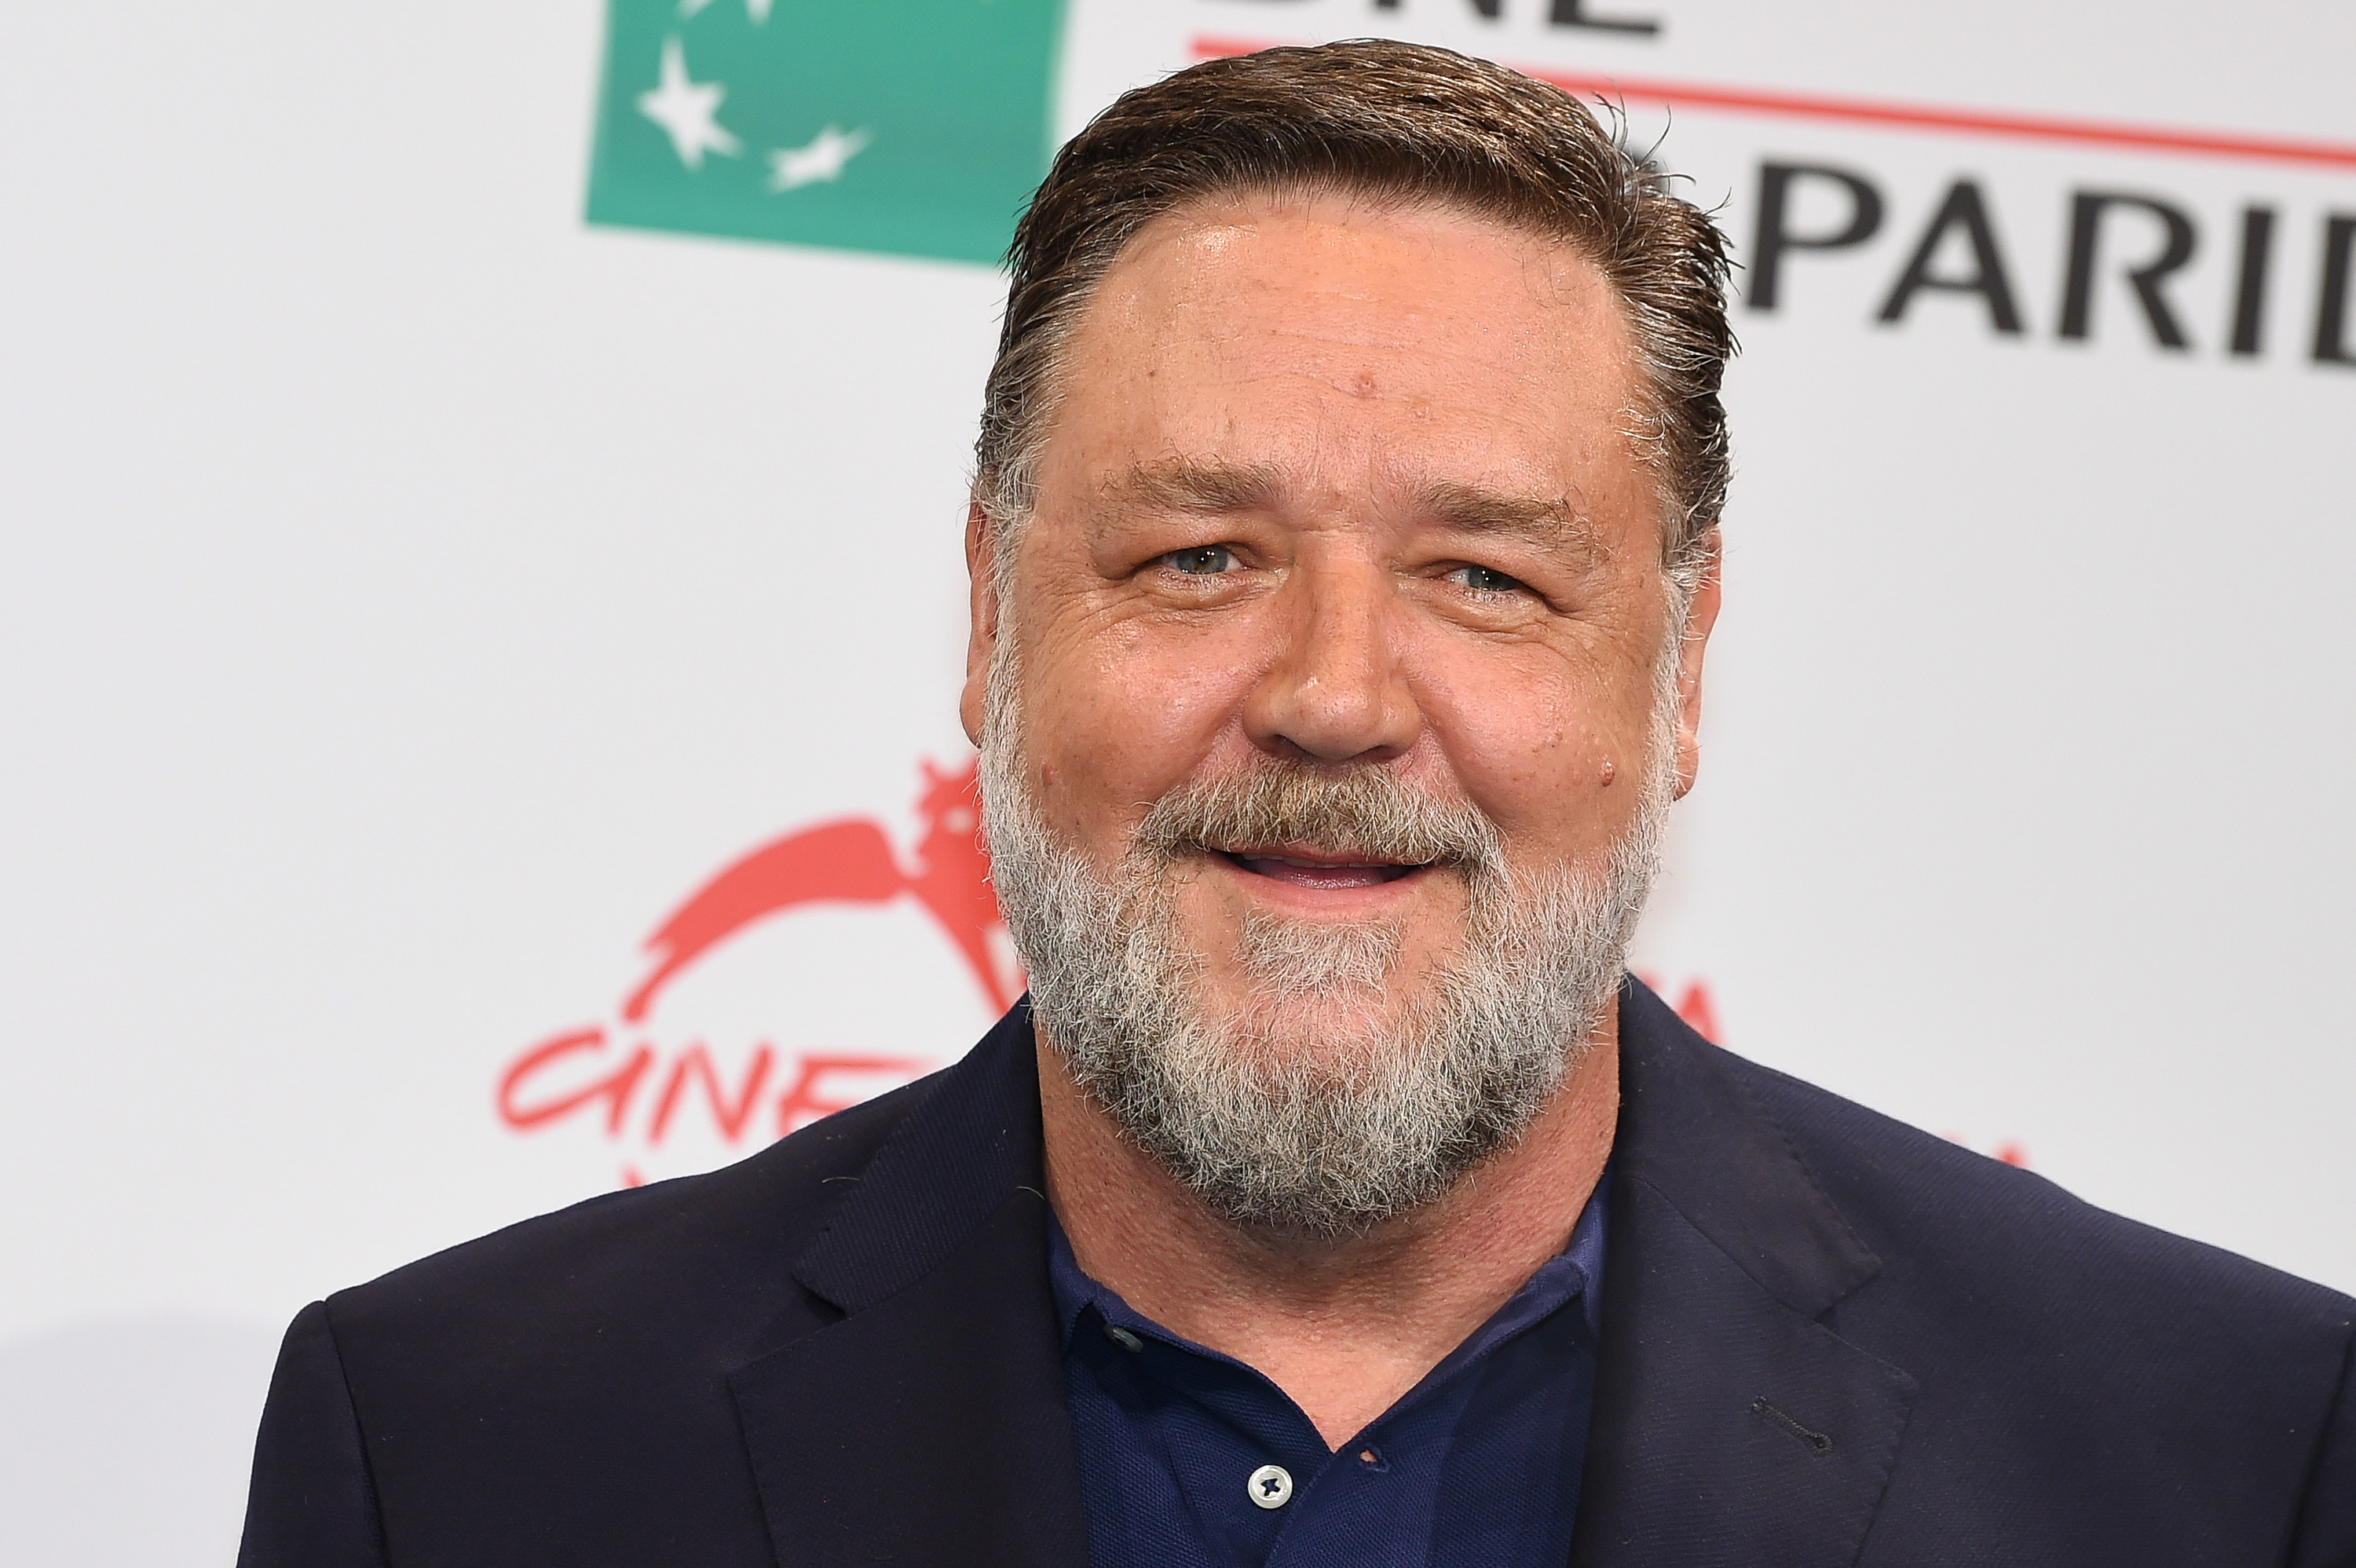 Russell Crowe at Rome Film Fest 2022.